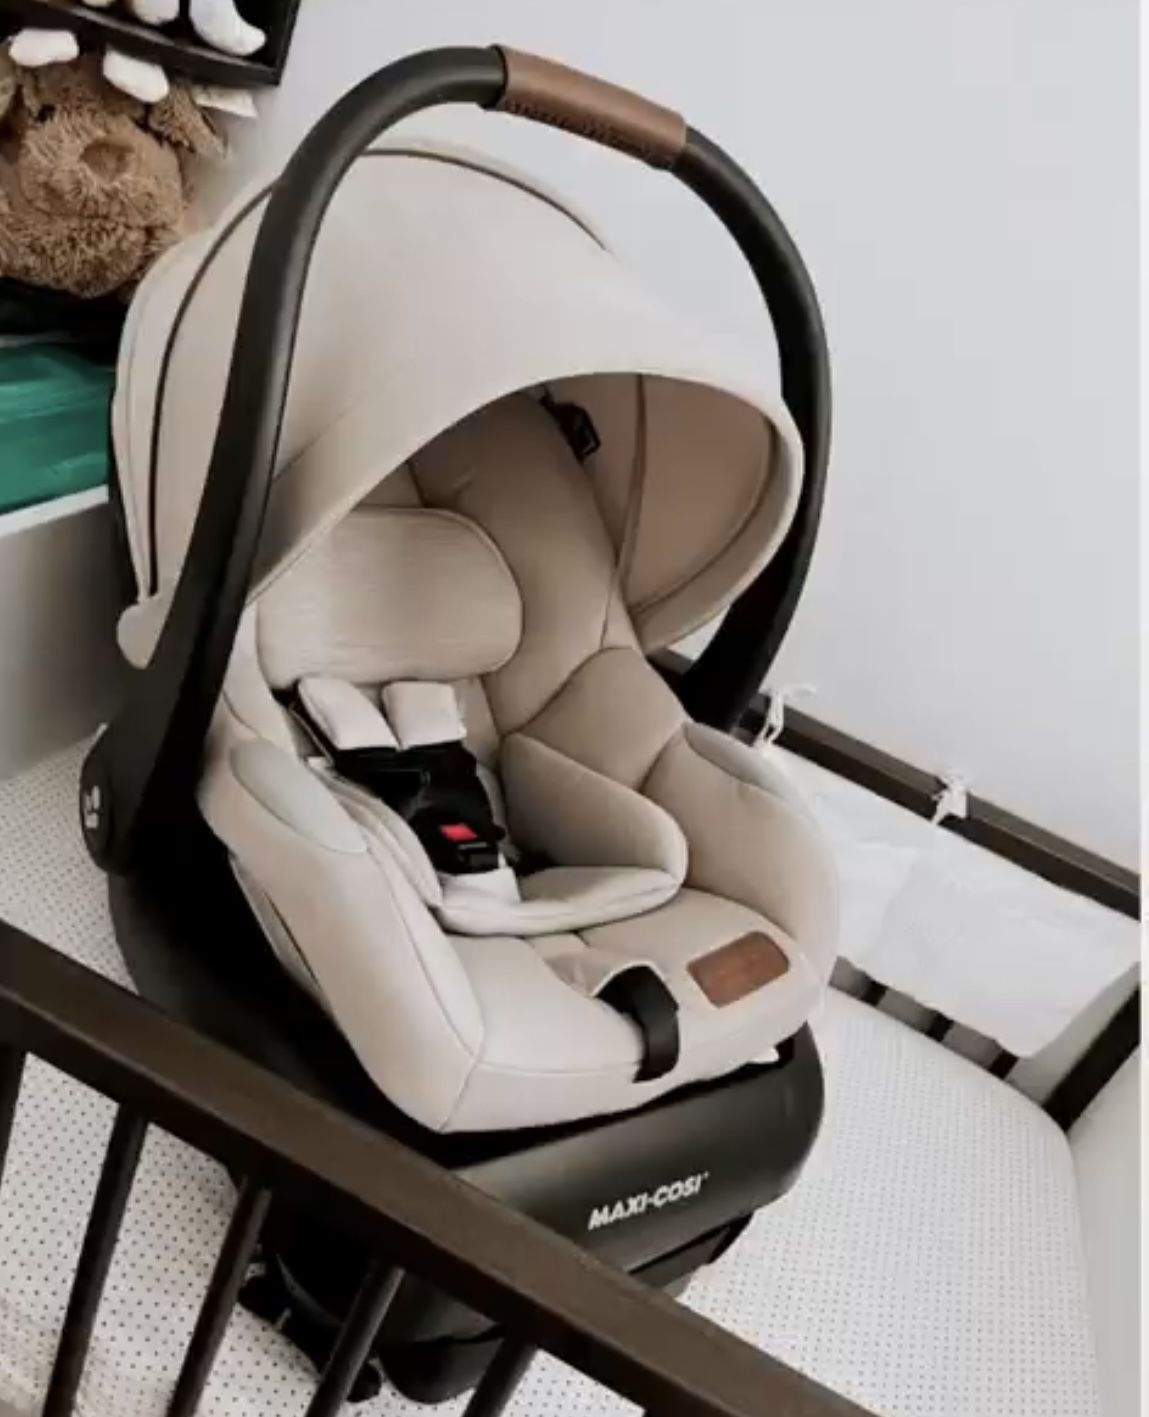 Maxi-cost Infant/ Baby Car Seat. Travel Car Seat, Baby Seat